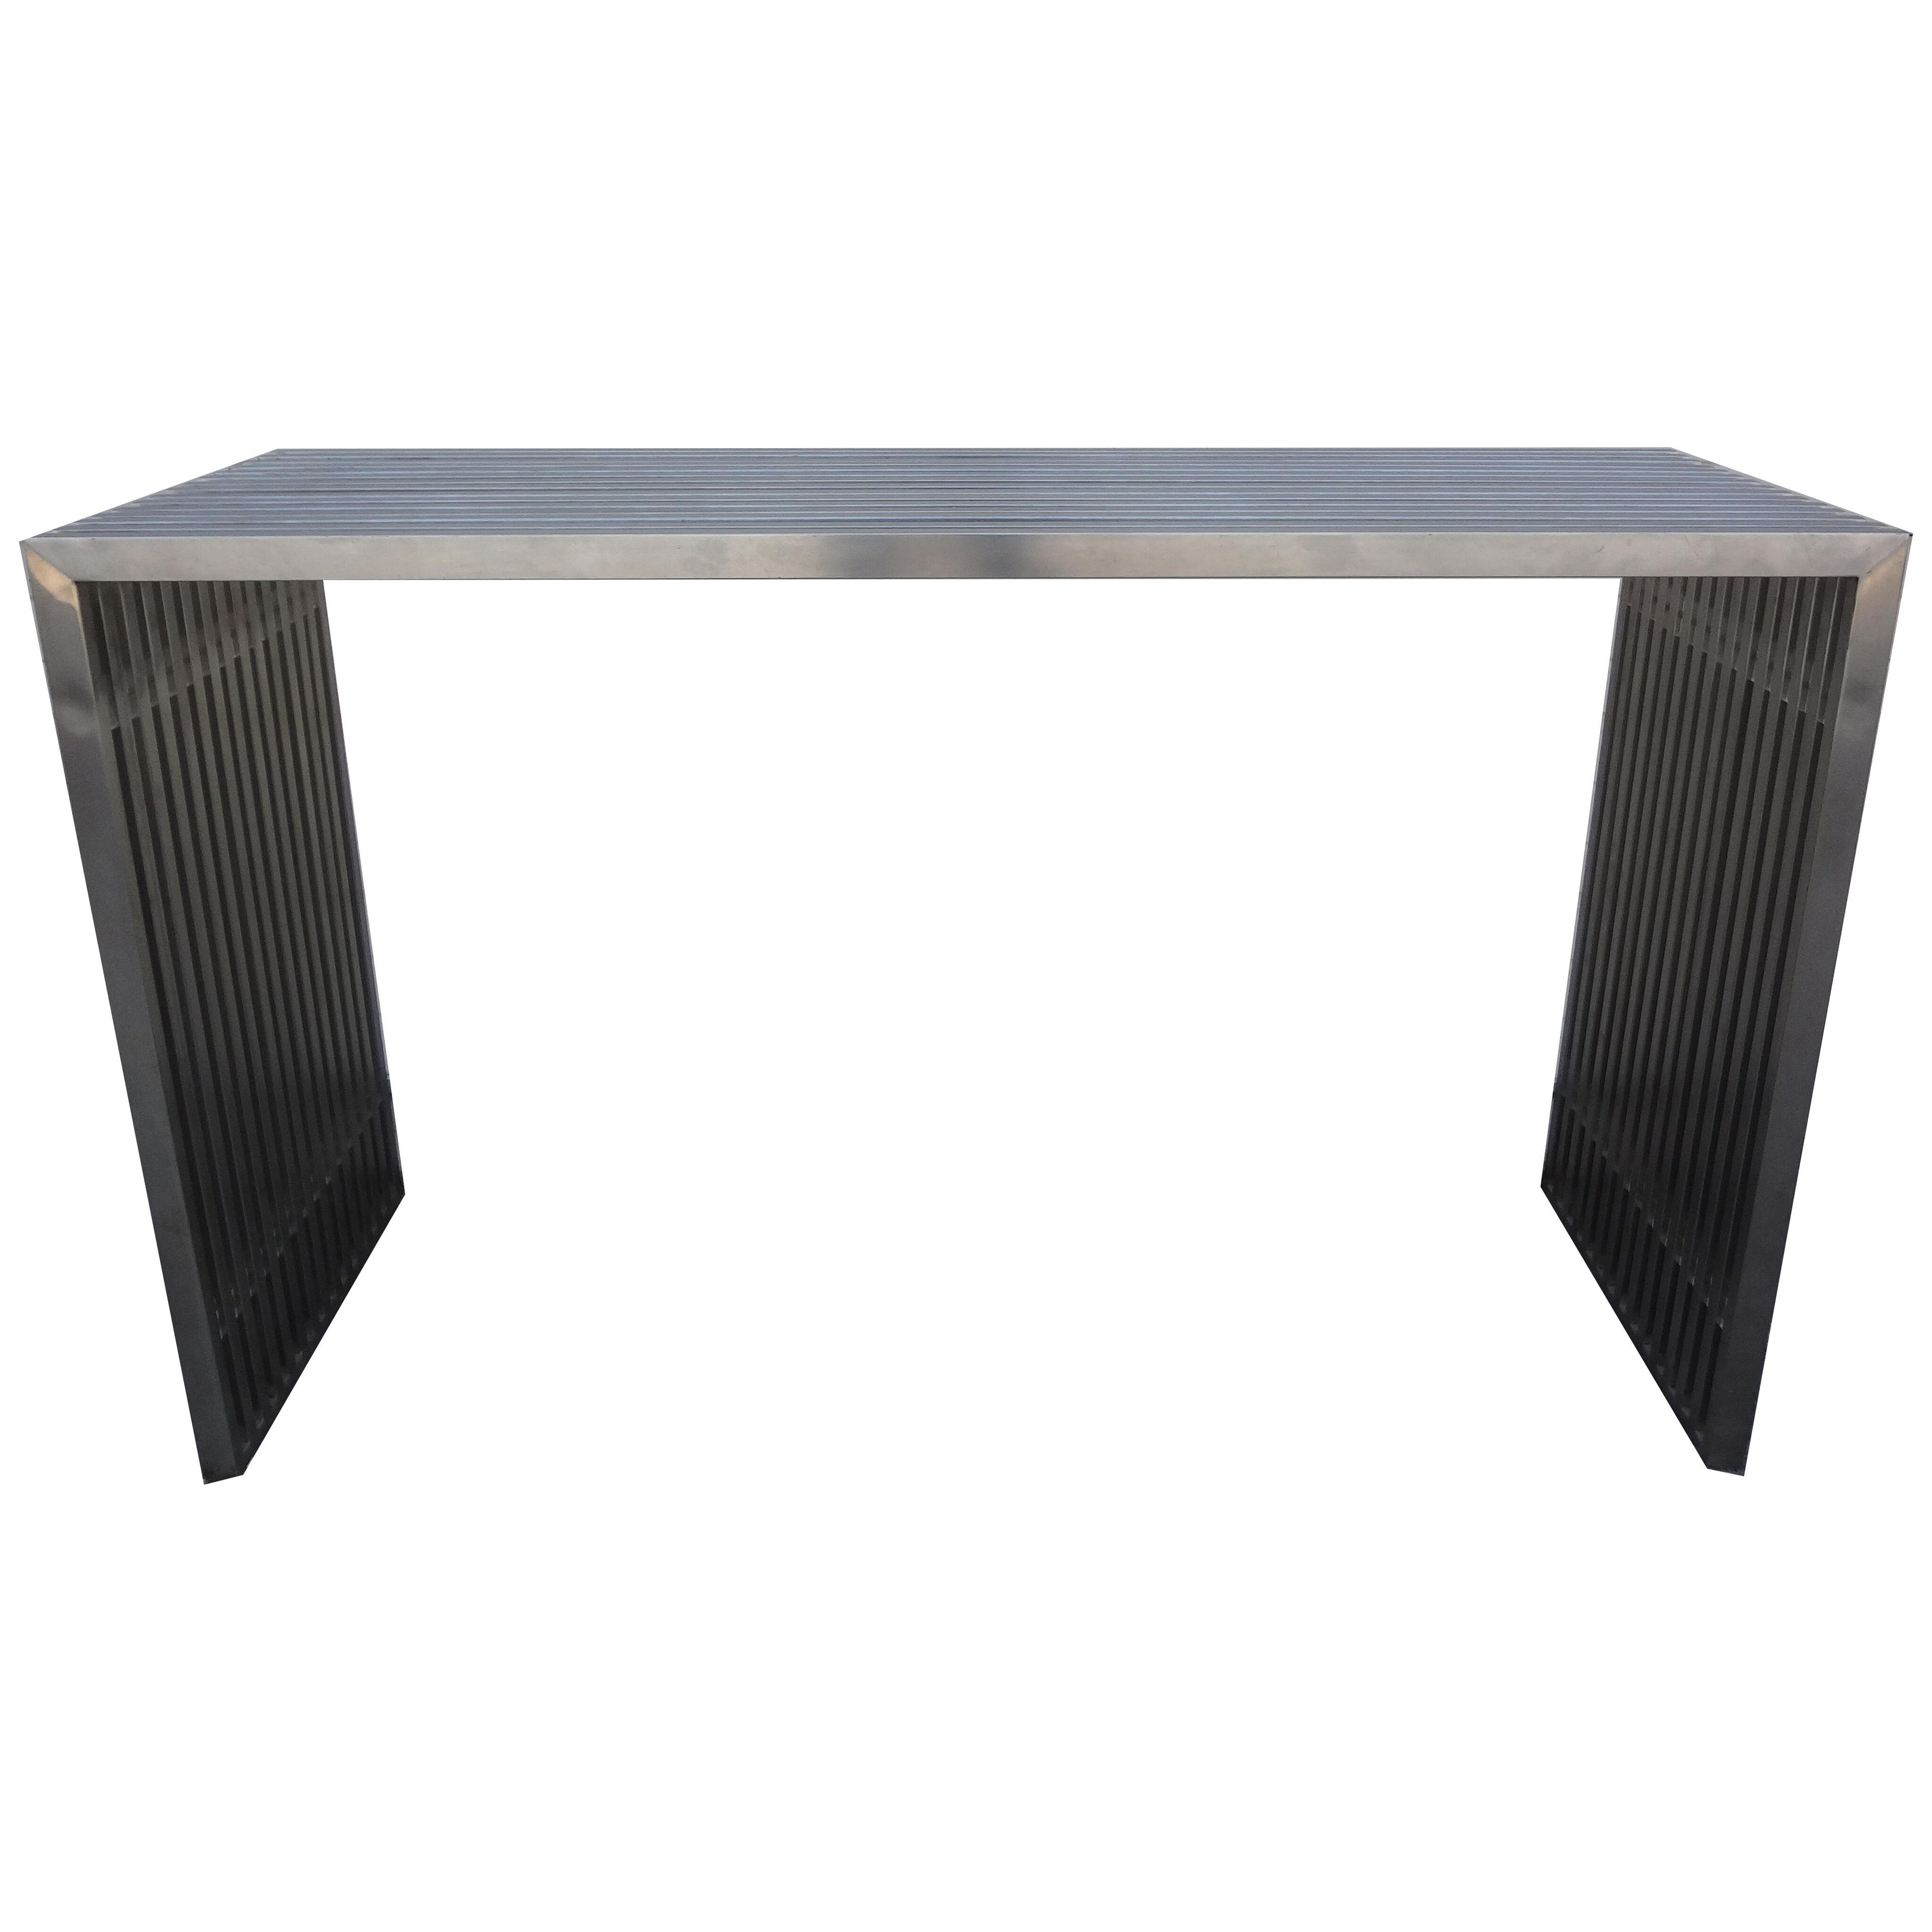 Italian Stainless Steel And Acrylic Console Table